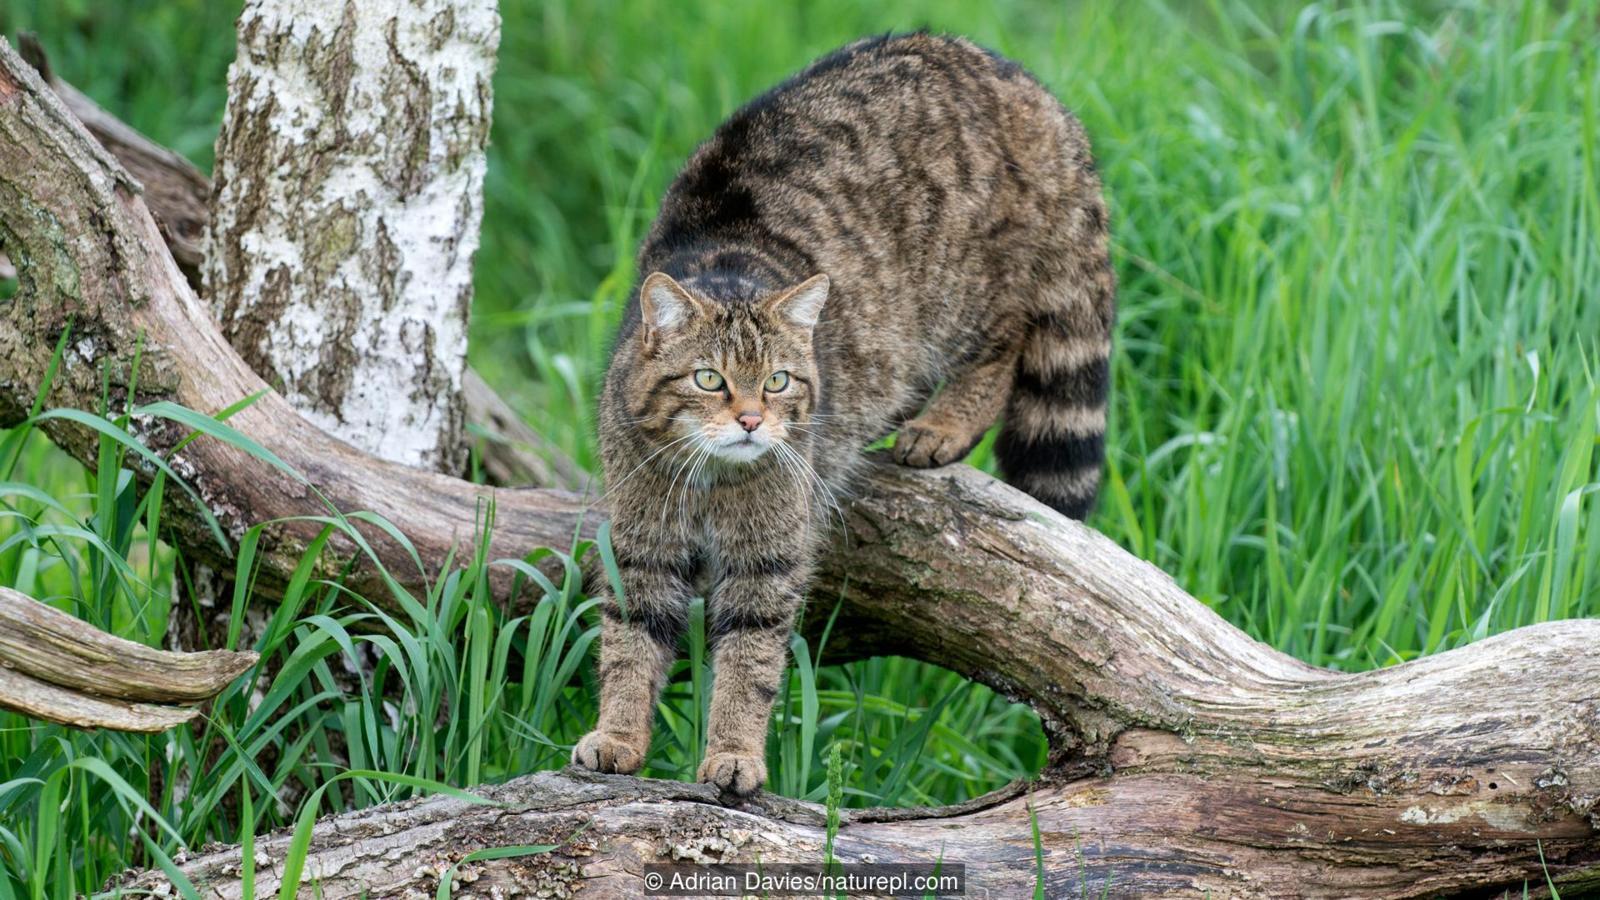 Scottish Wildcat on the prowl, link in comments